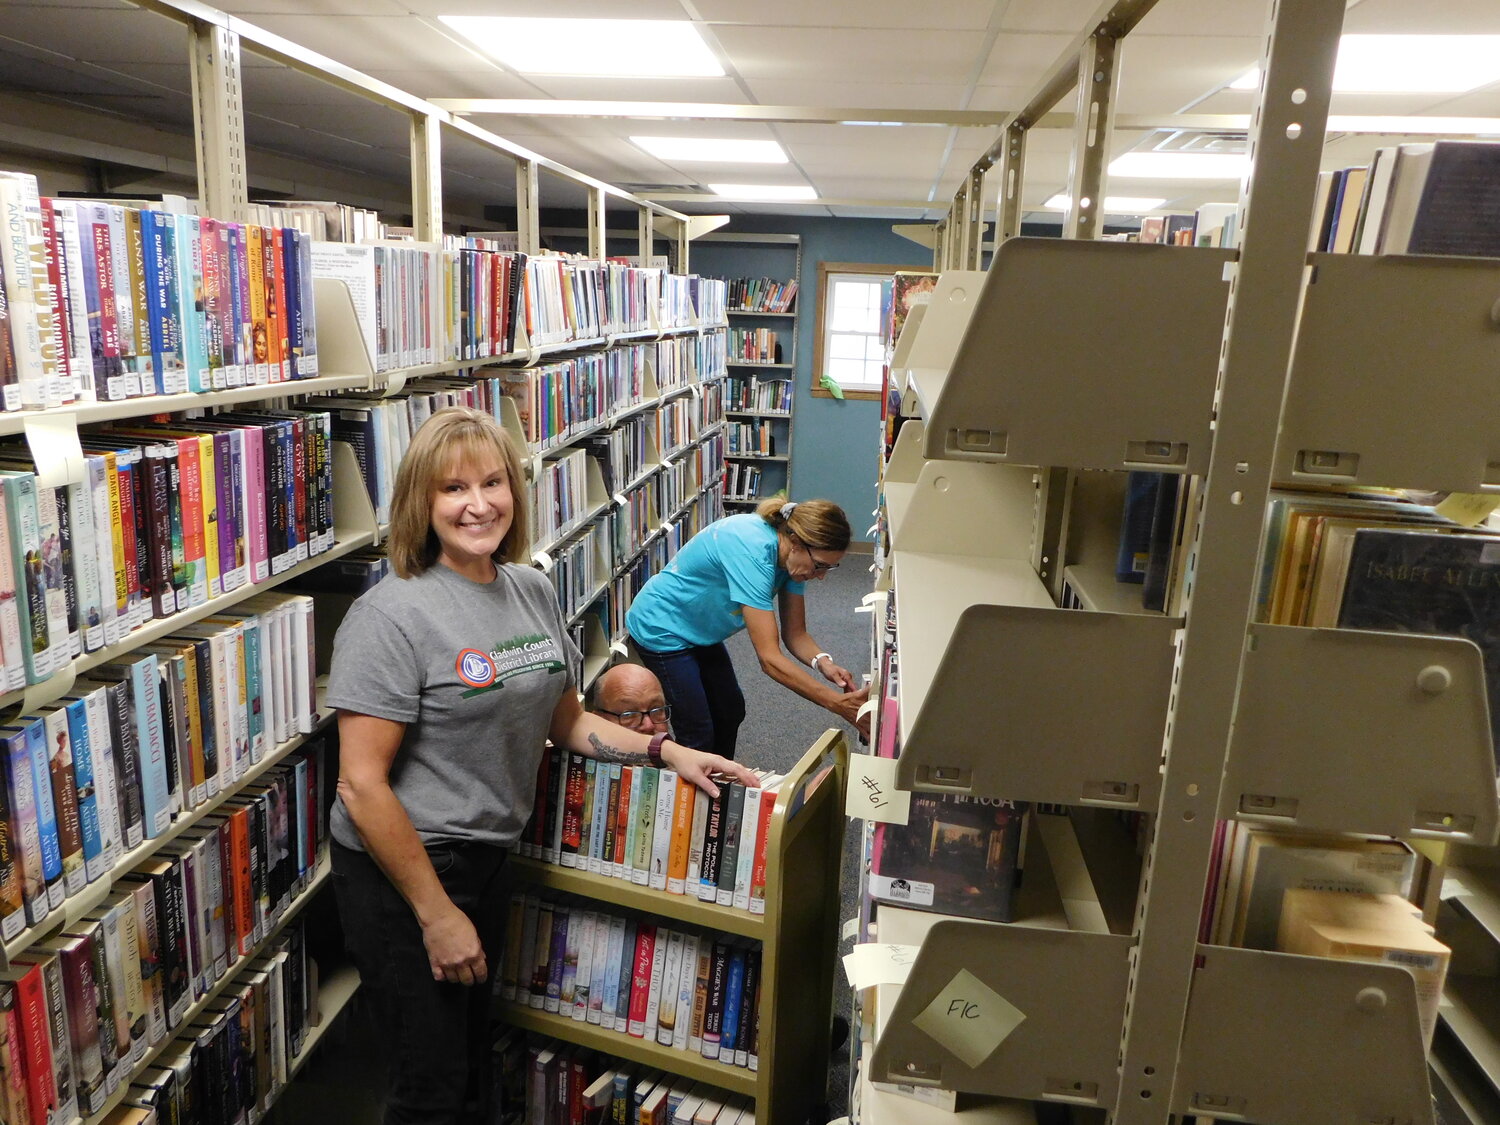 Pere Marquette District Library, Coleman Library and the Gladwin County District Library sent staff to aid in moving and organizing library materials.